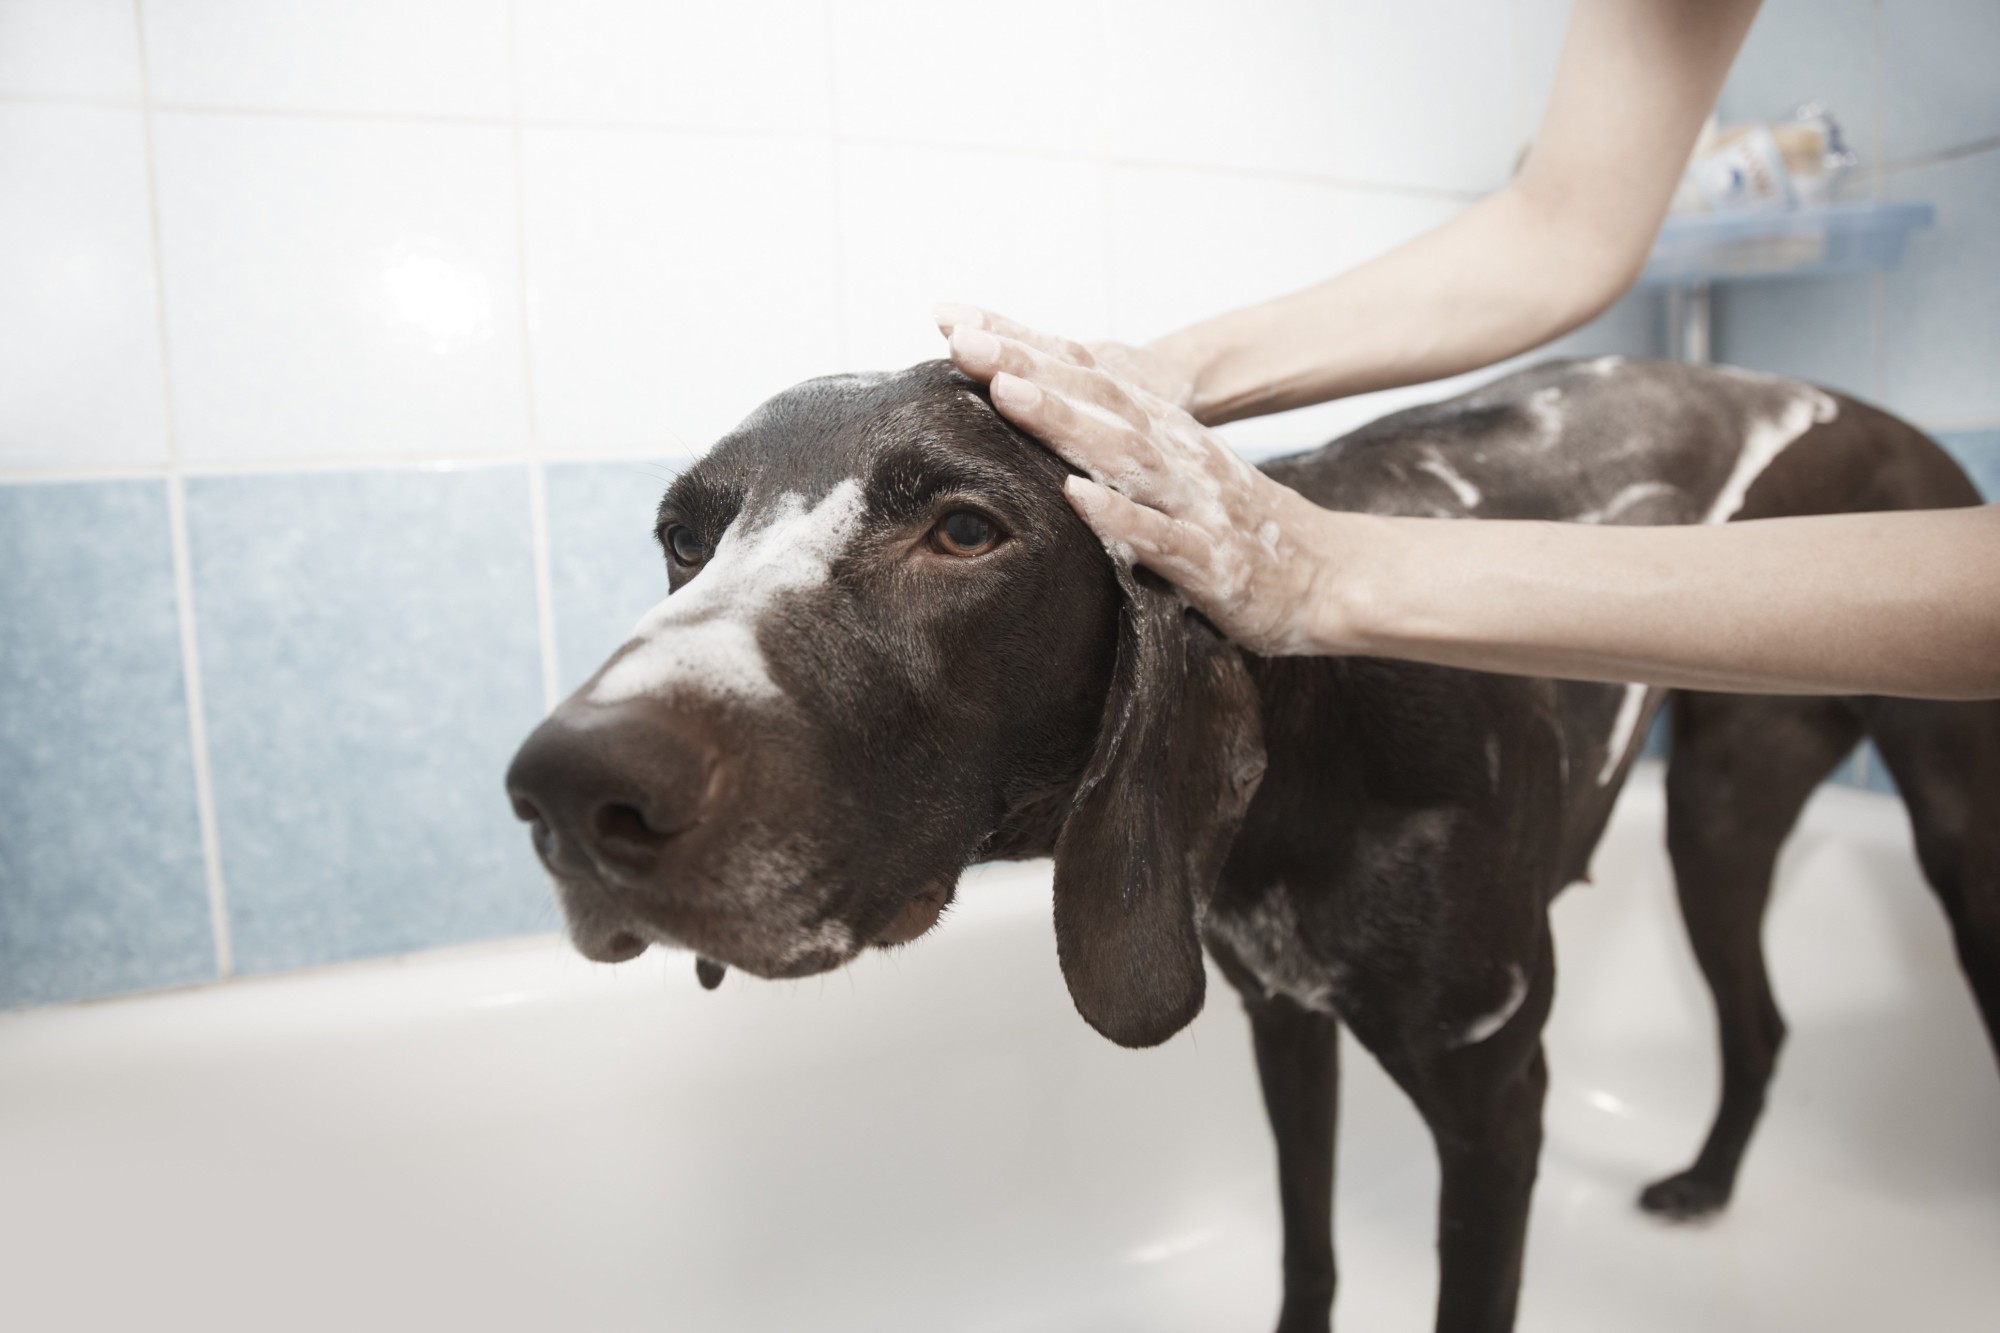 How To Get A Big Dog In The Bathtub